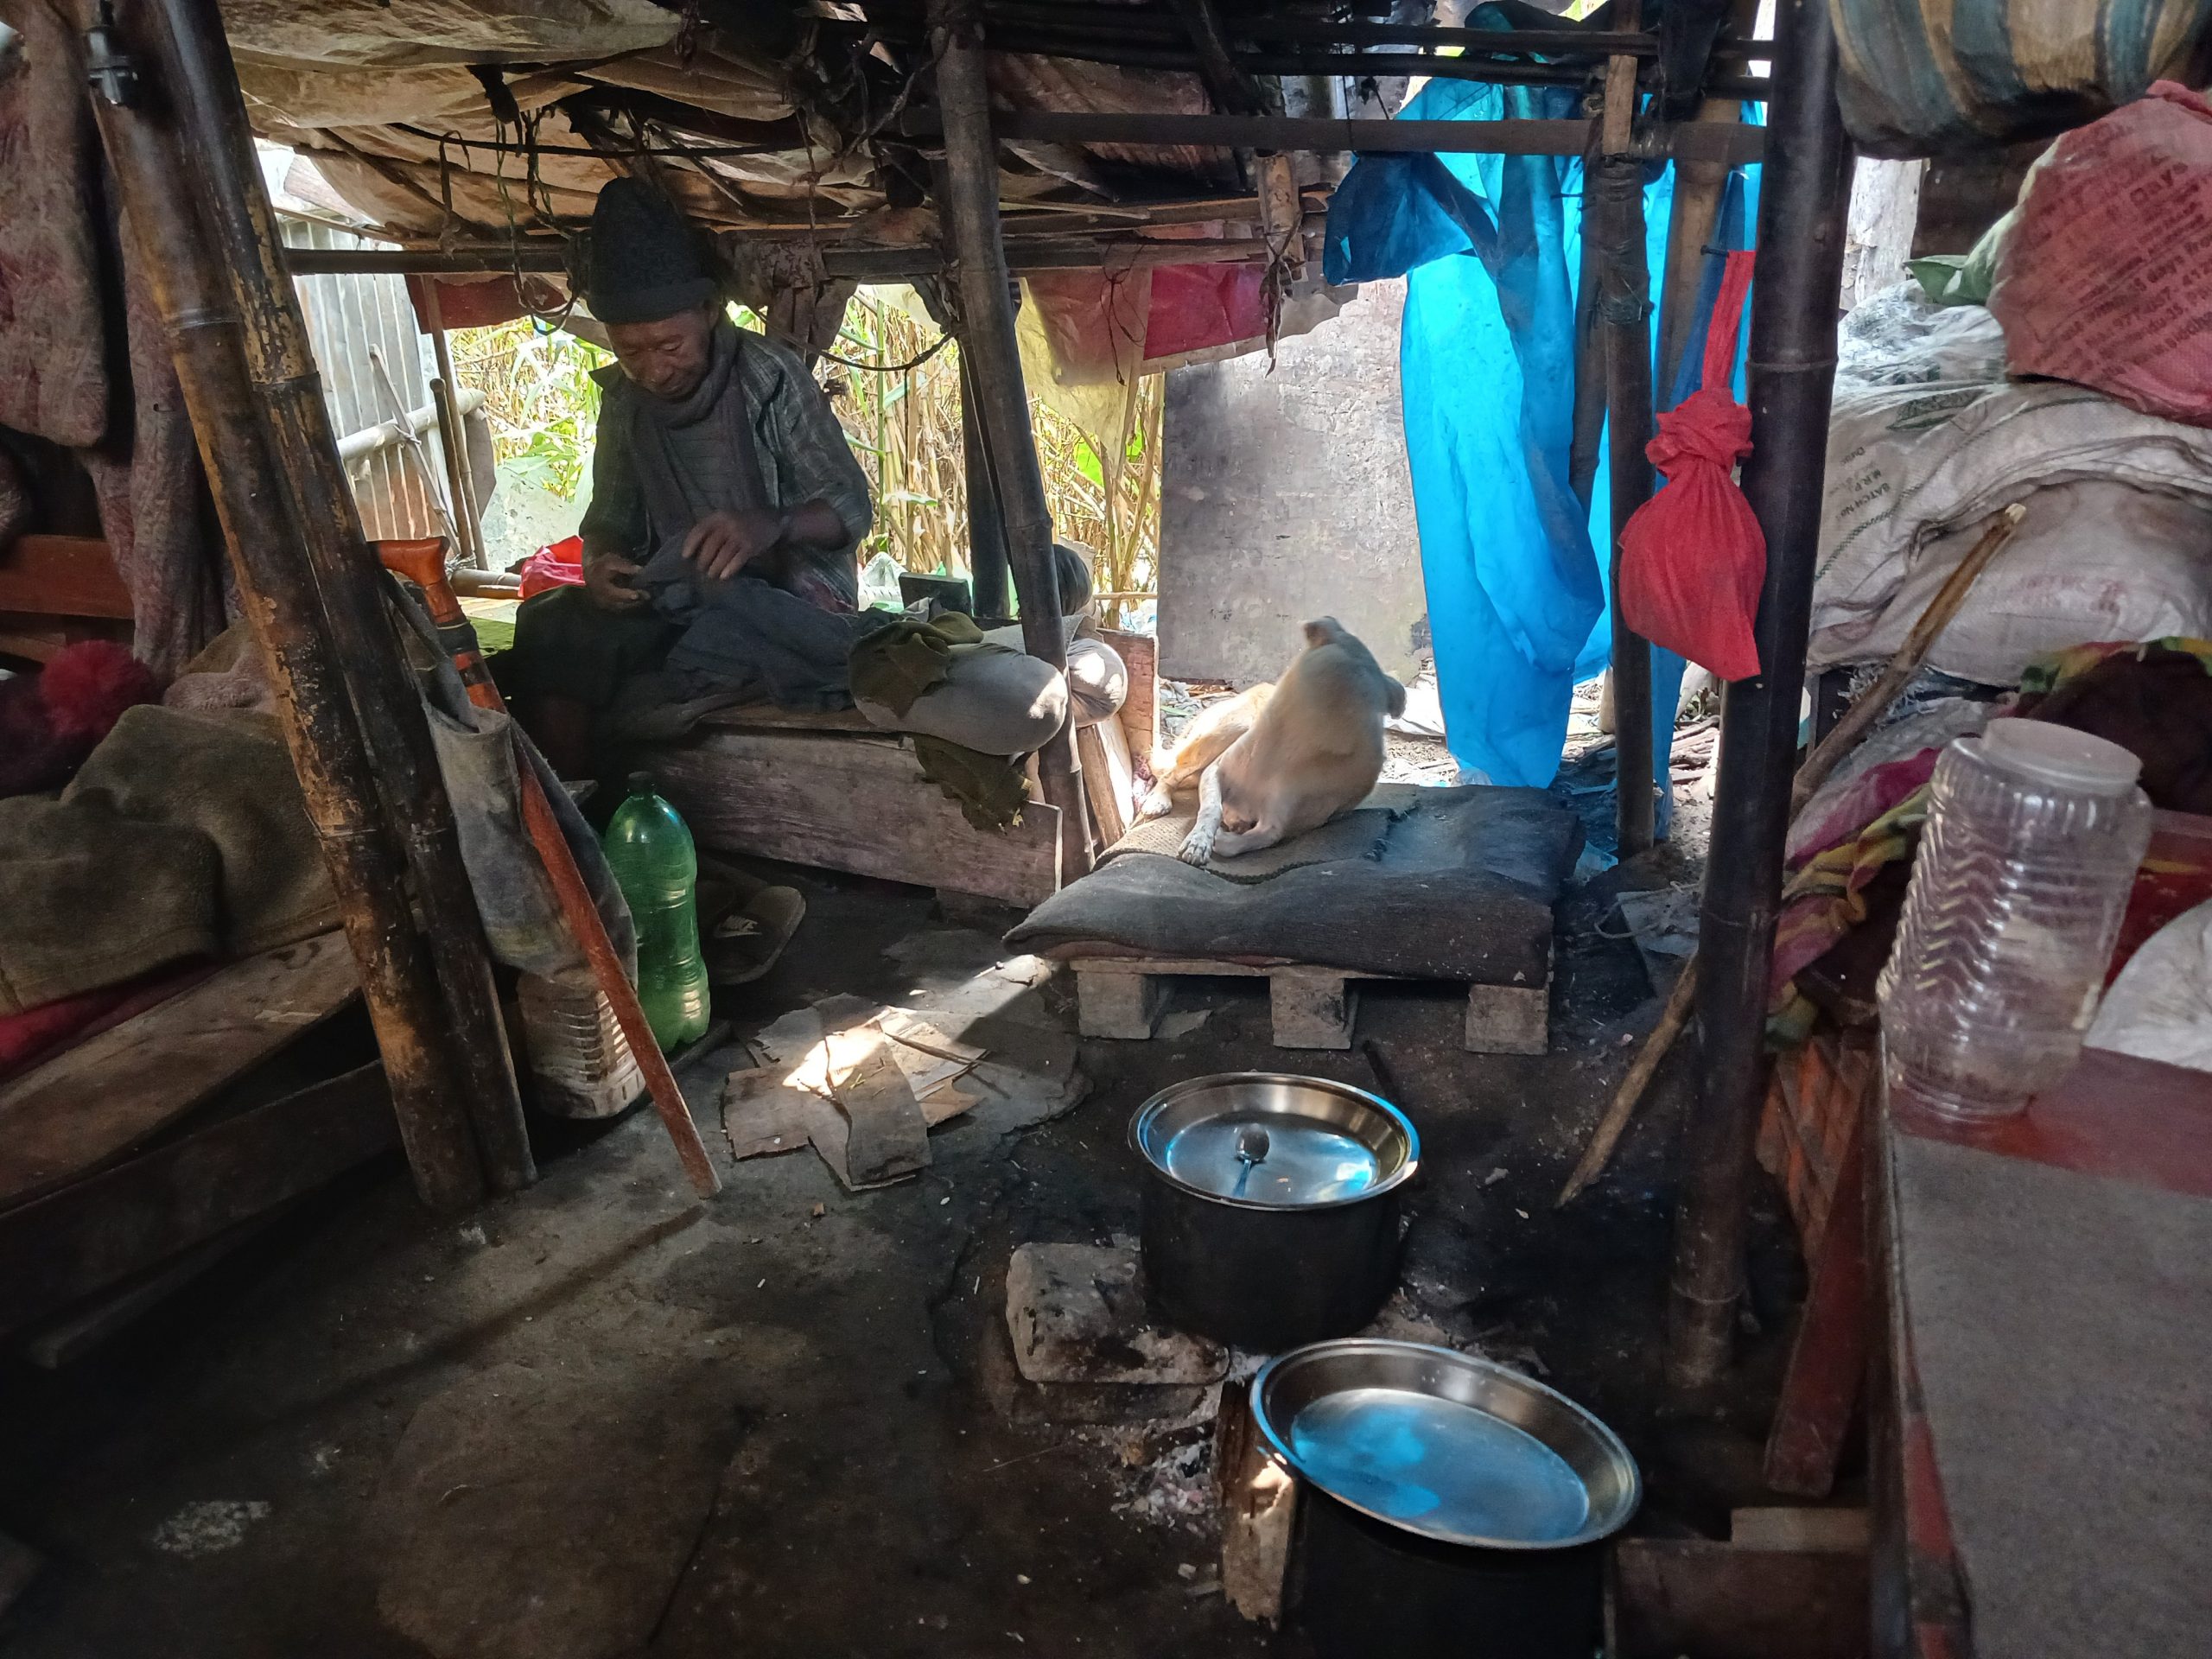 Behind the scenes: The journey of gaining access to informal settlements in Kathmandu, Nepal